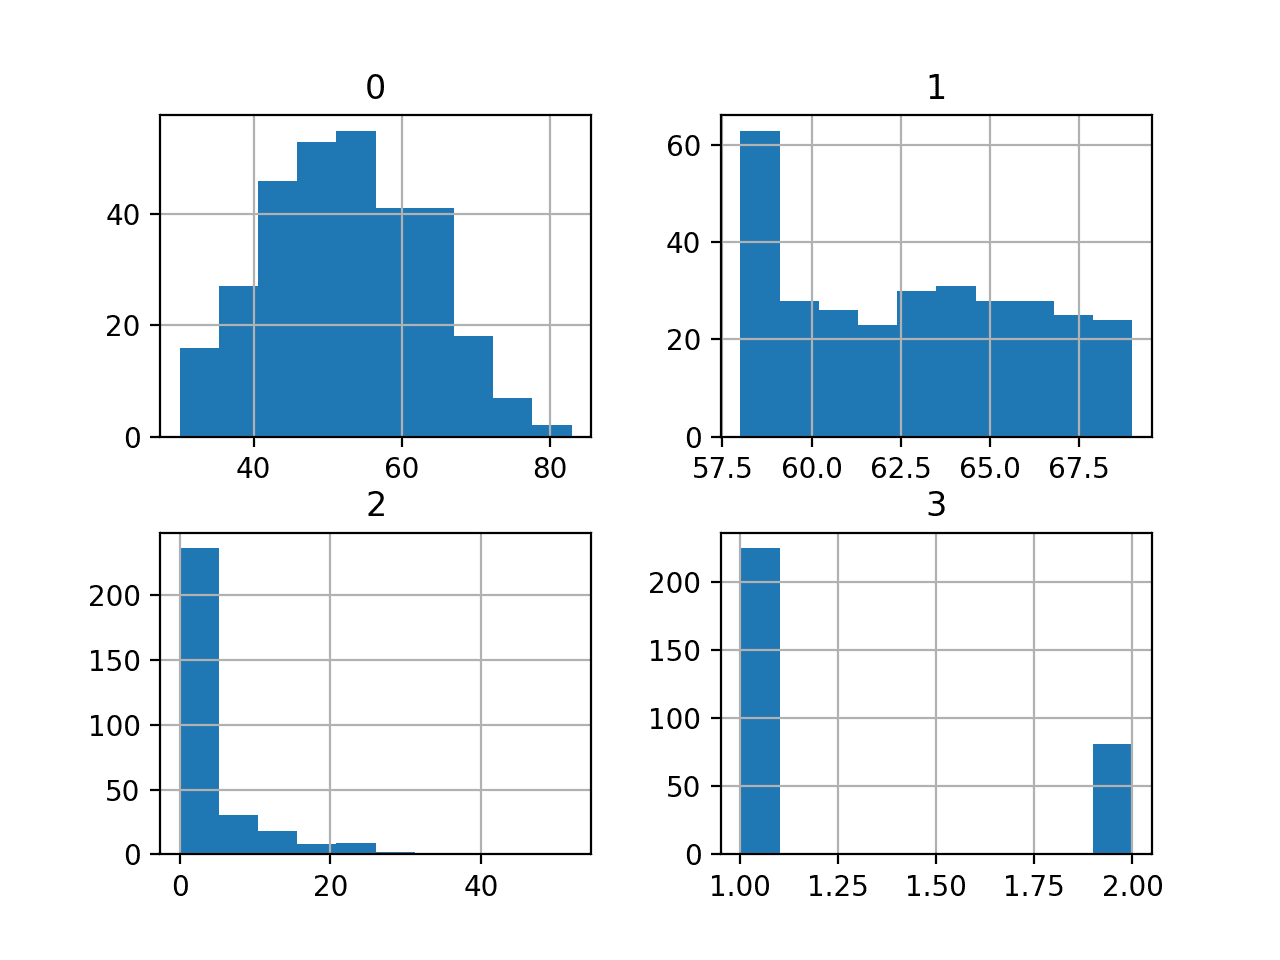 Histograms of the Haberman Breast Cancer Survival Classification Dataset